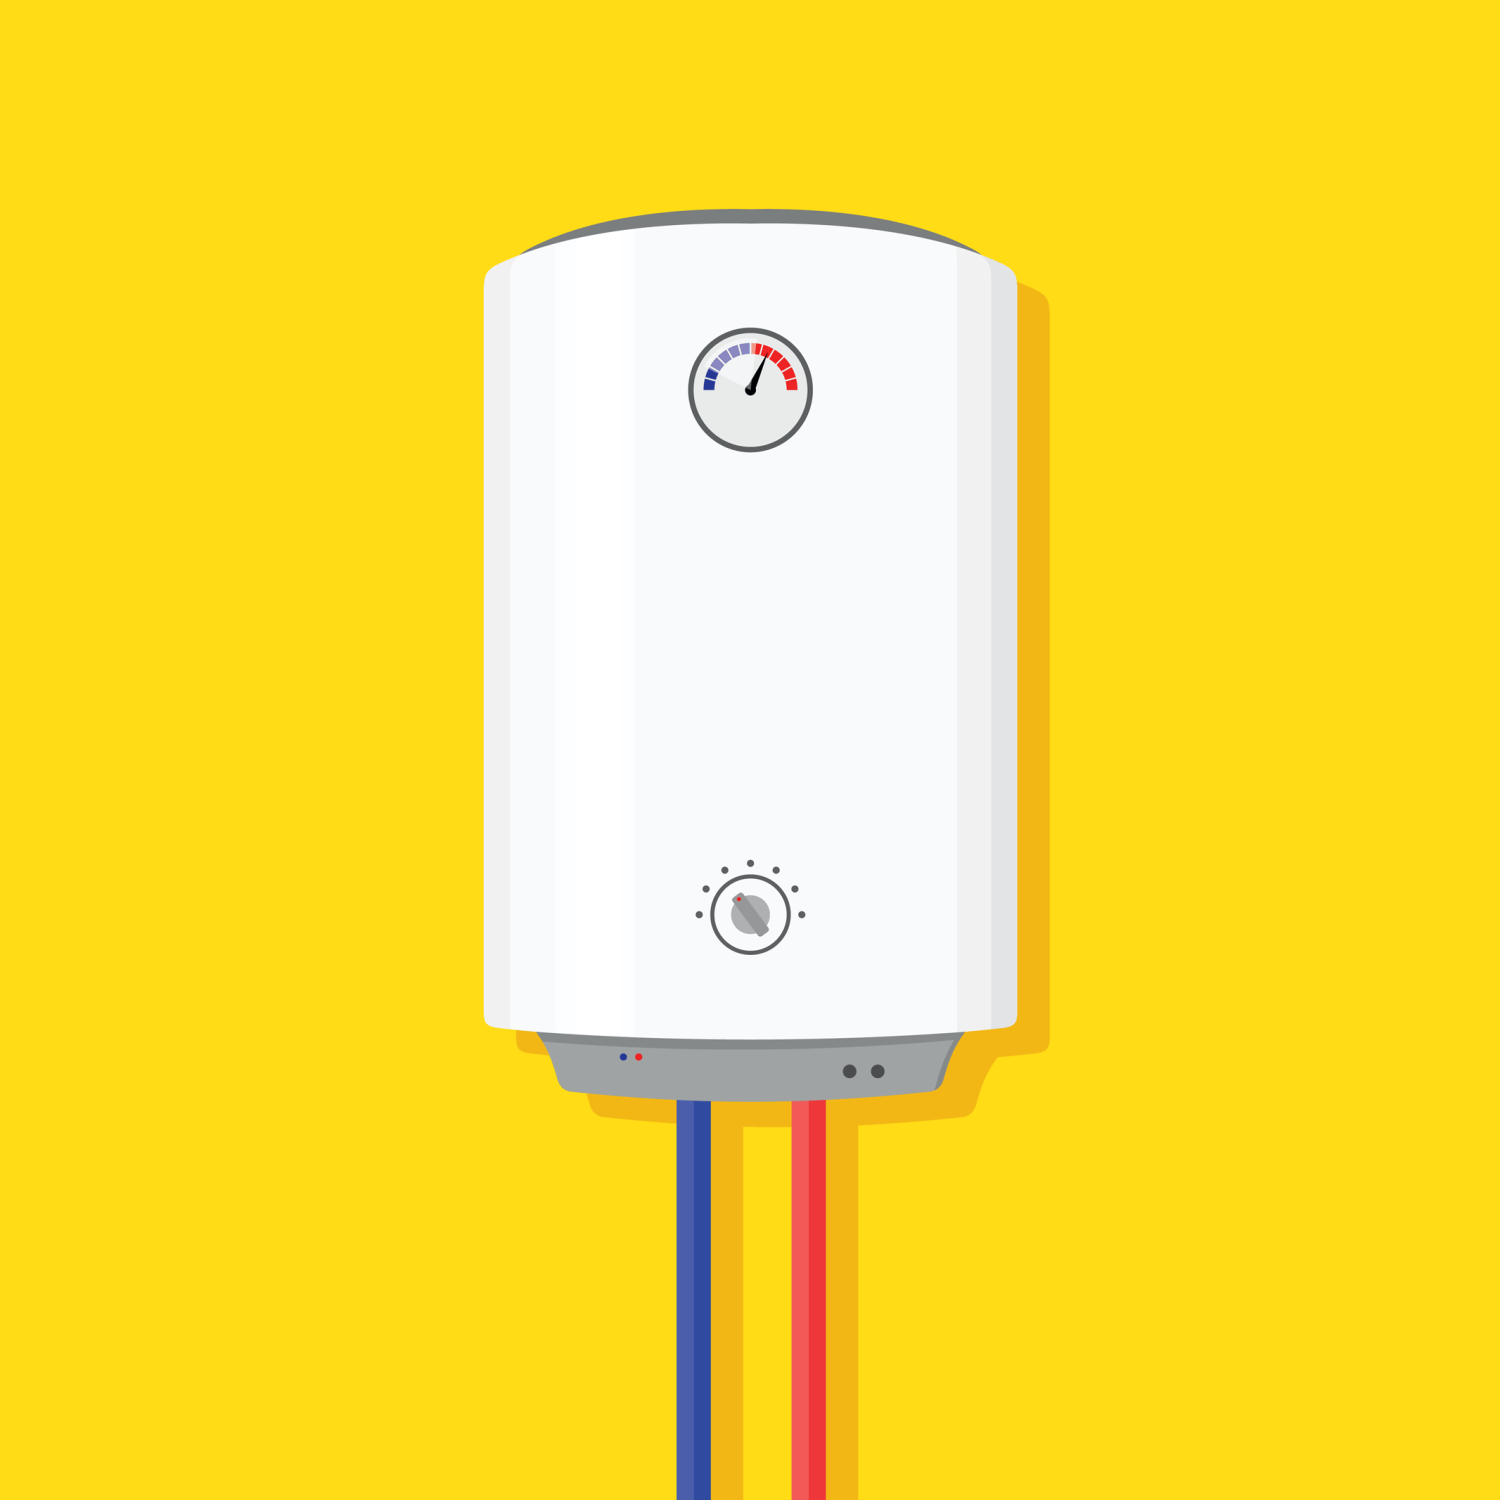 Illustration of a home water heater